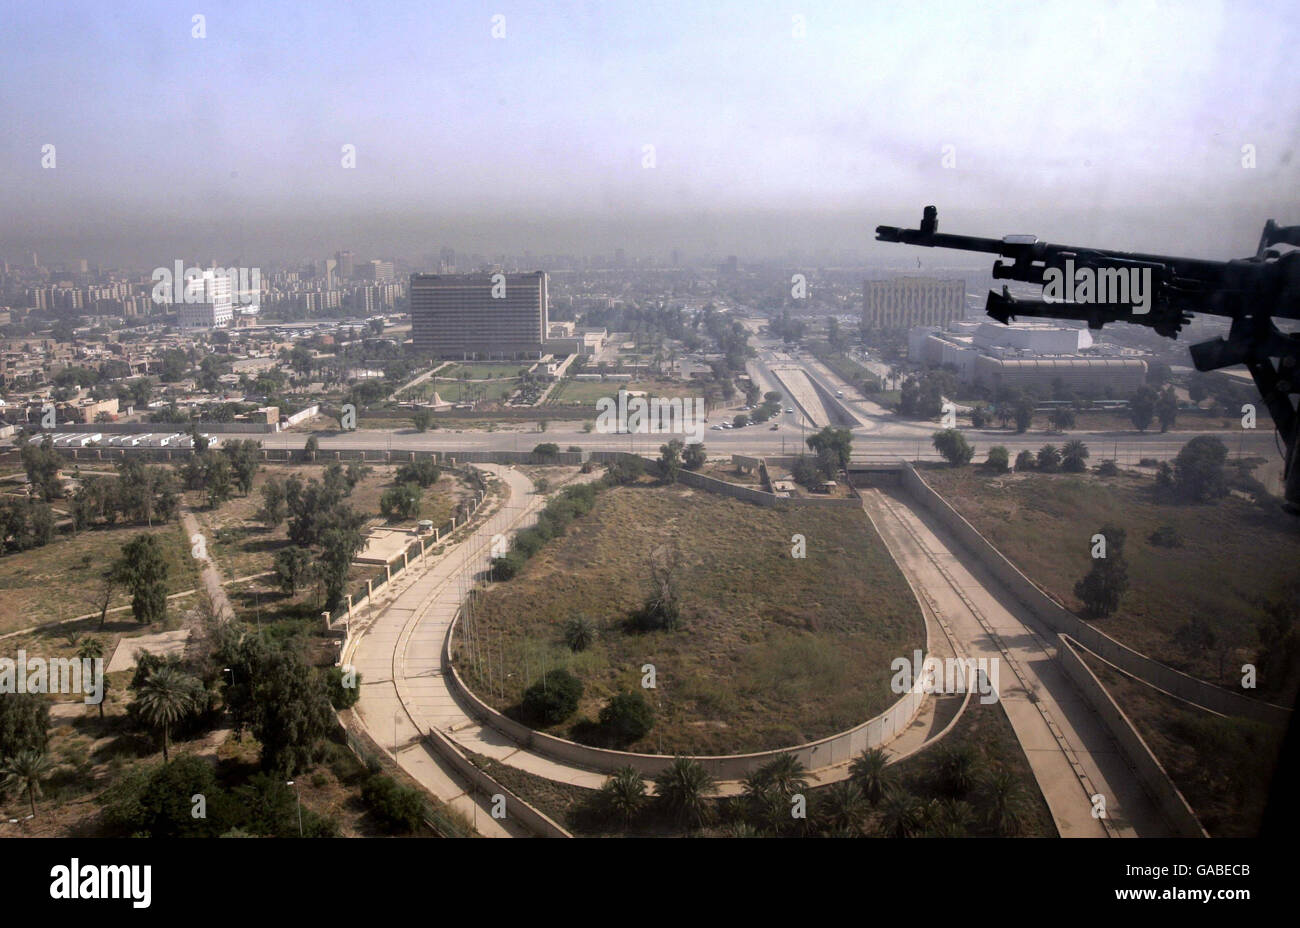 A partial view of the Iraqi capital Baghdad as seen from a United States Army helicopter, on route from Baghdad International Airport to the heavily-fortified Green Zone in Baghdad. Stock Photo